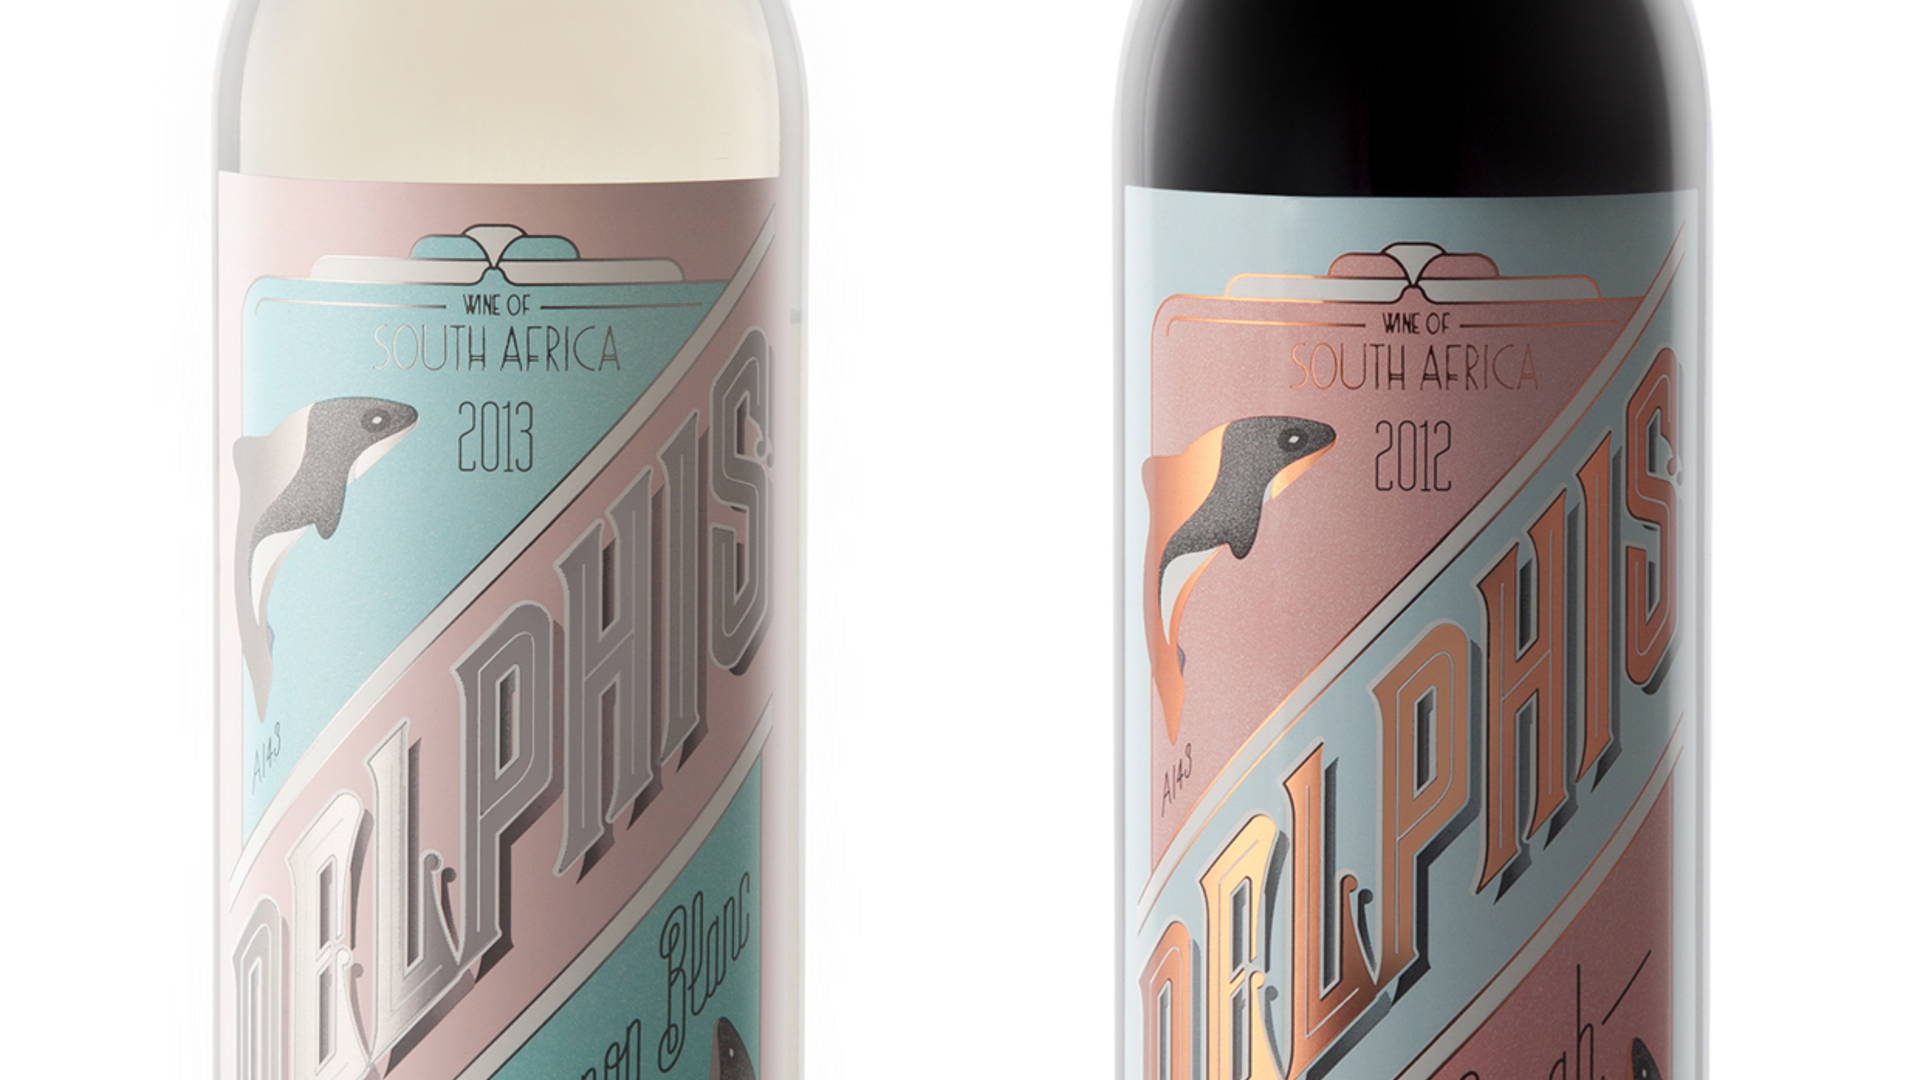 Featured image for Delphis Wine Label